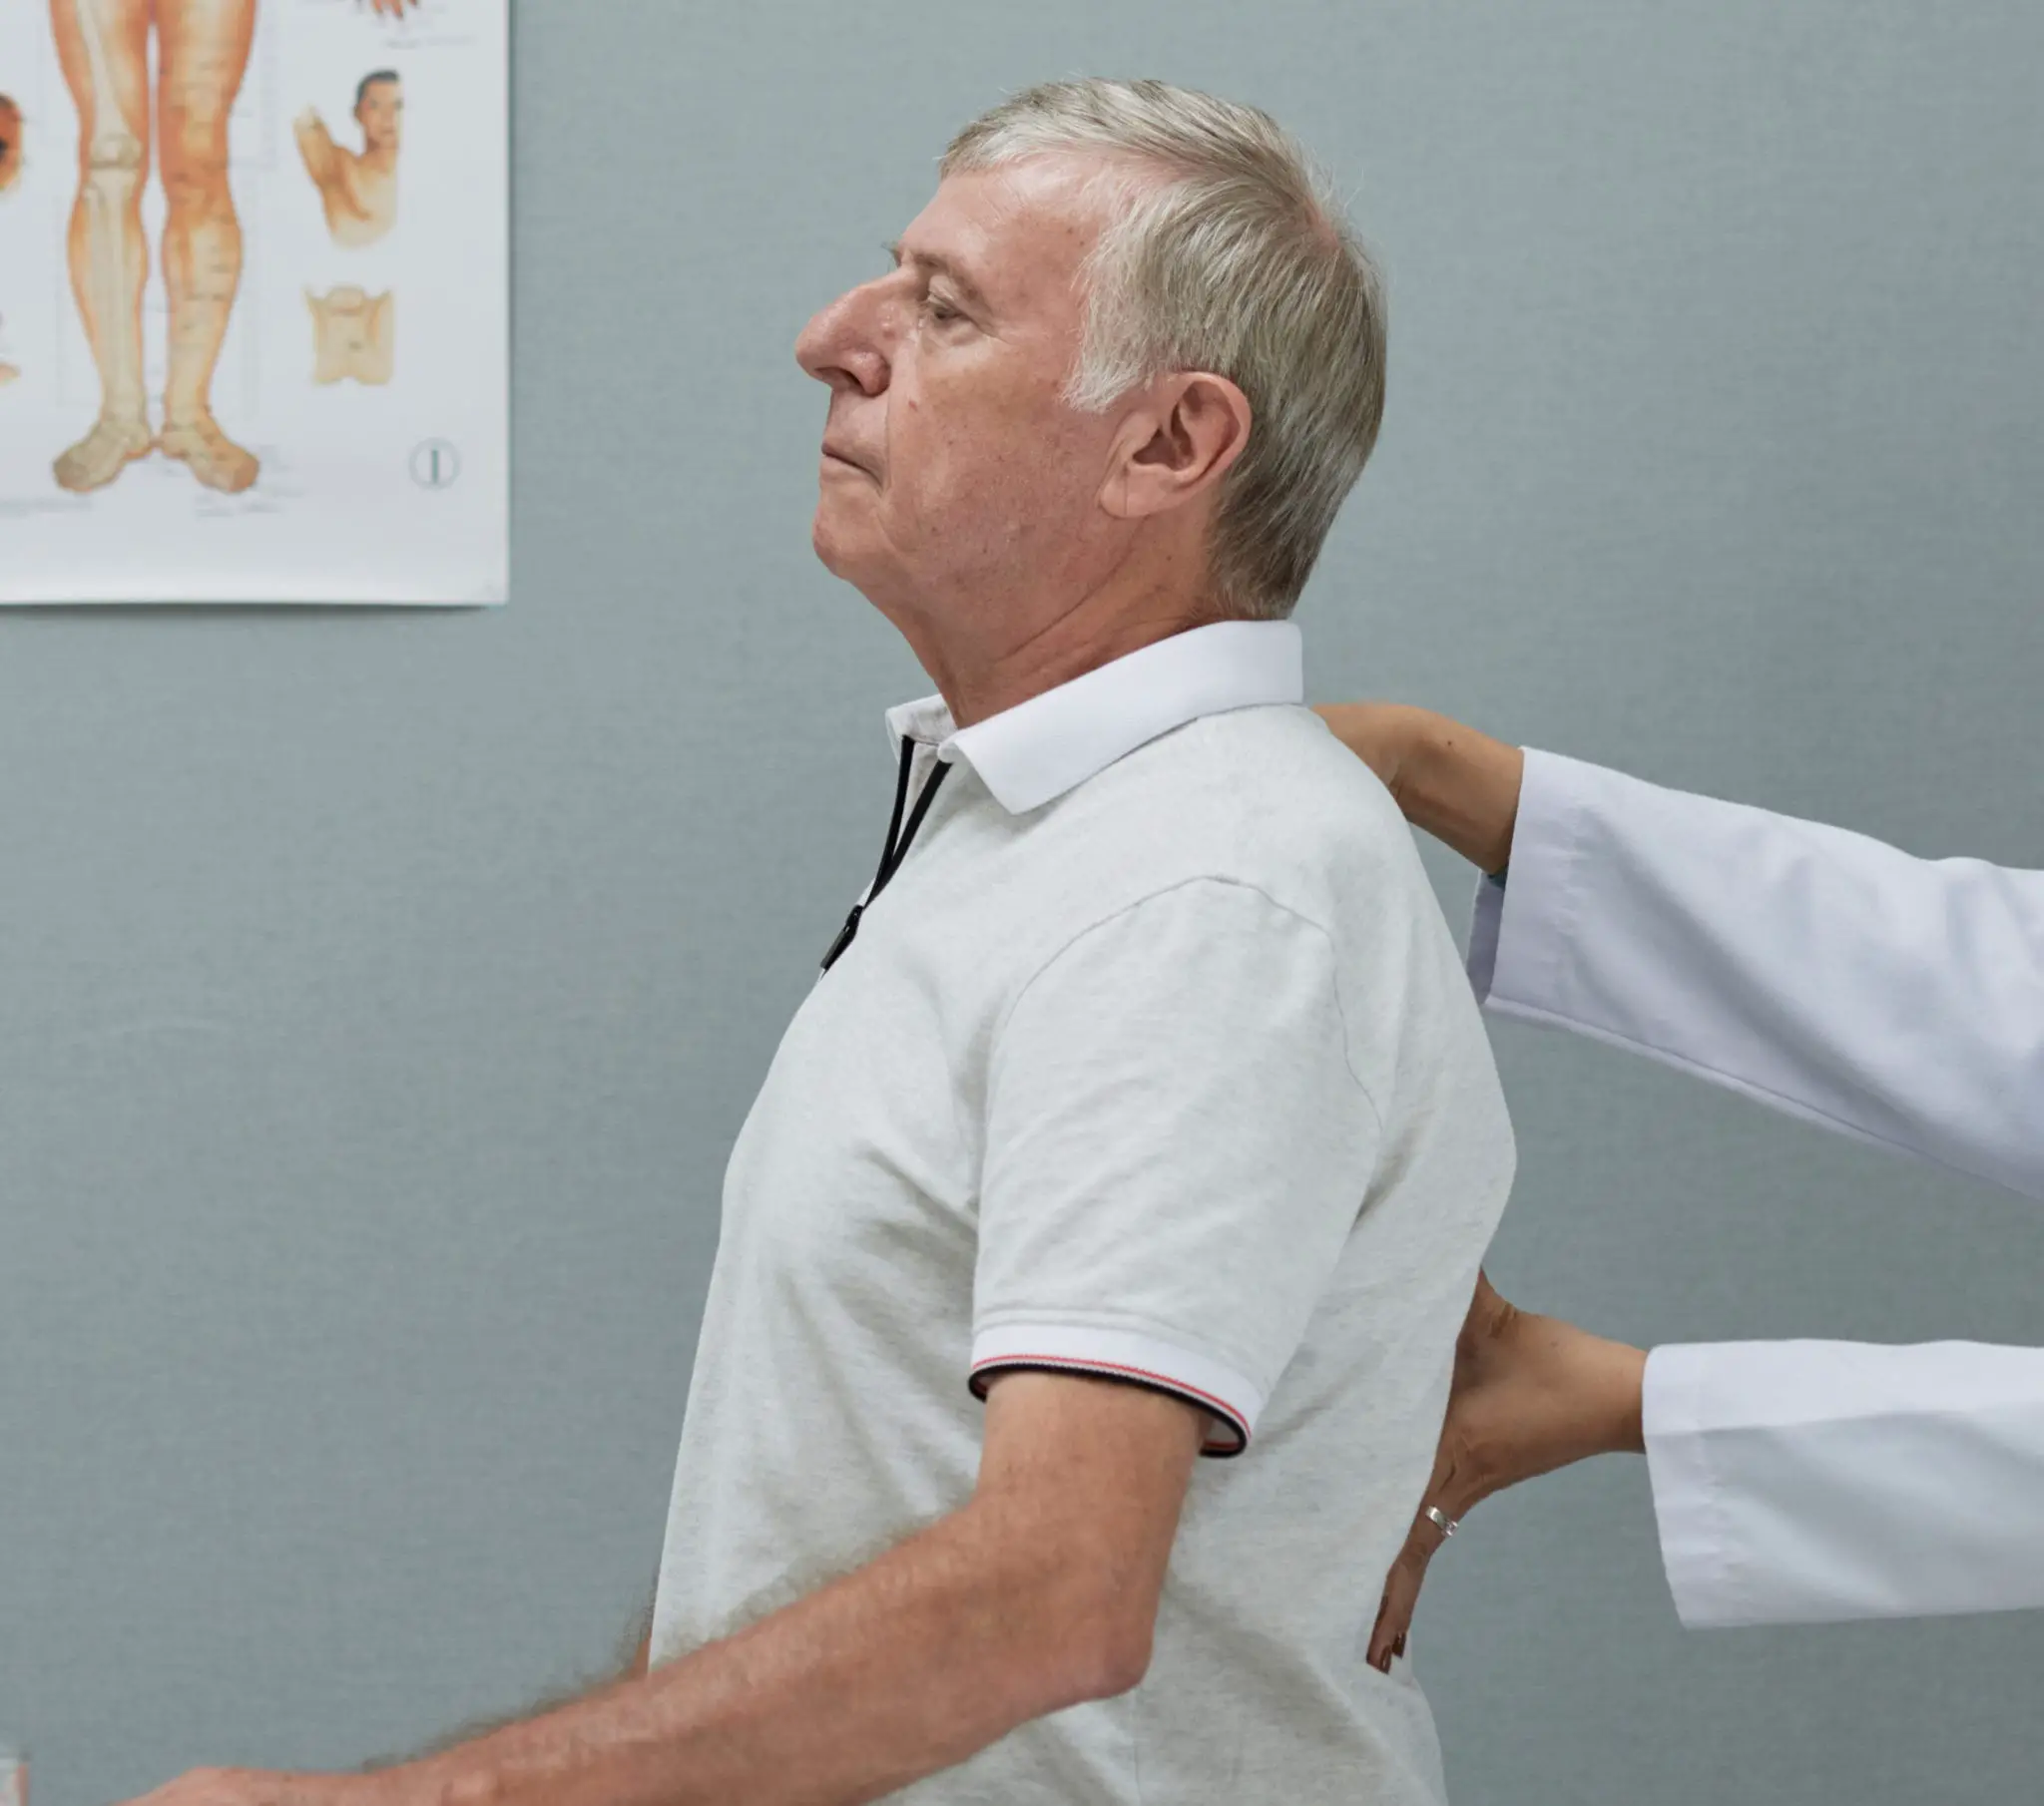 Does Medicare cover chiropractic?